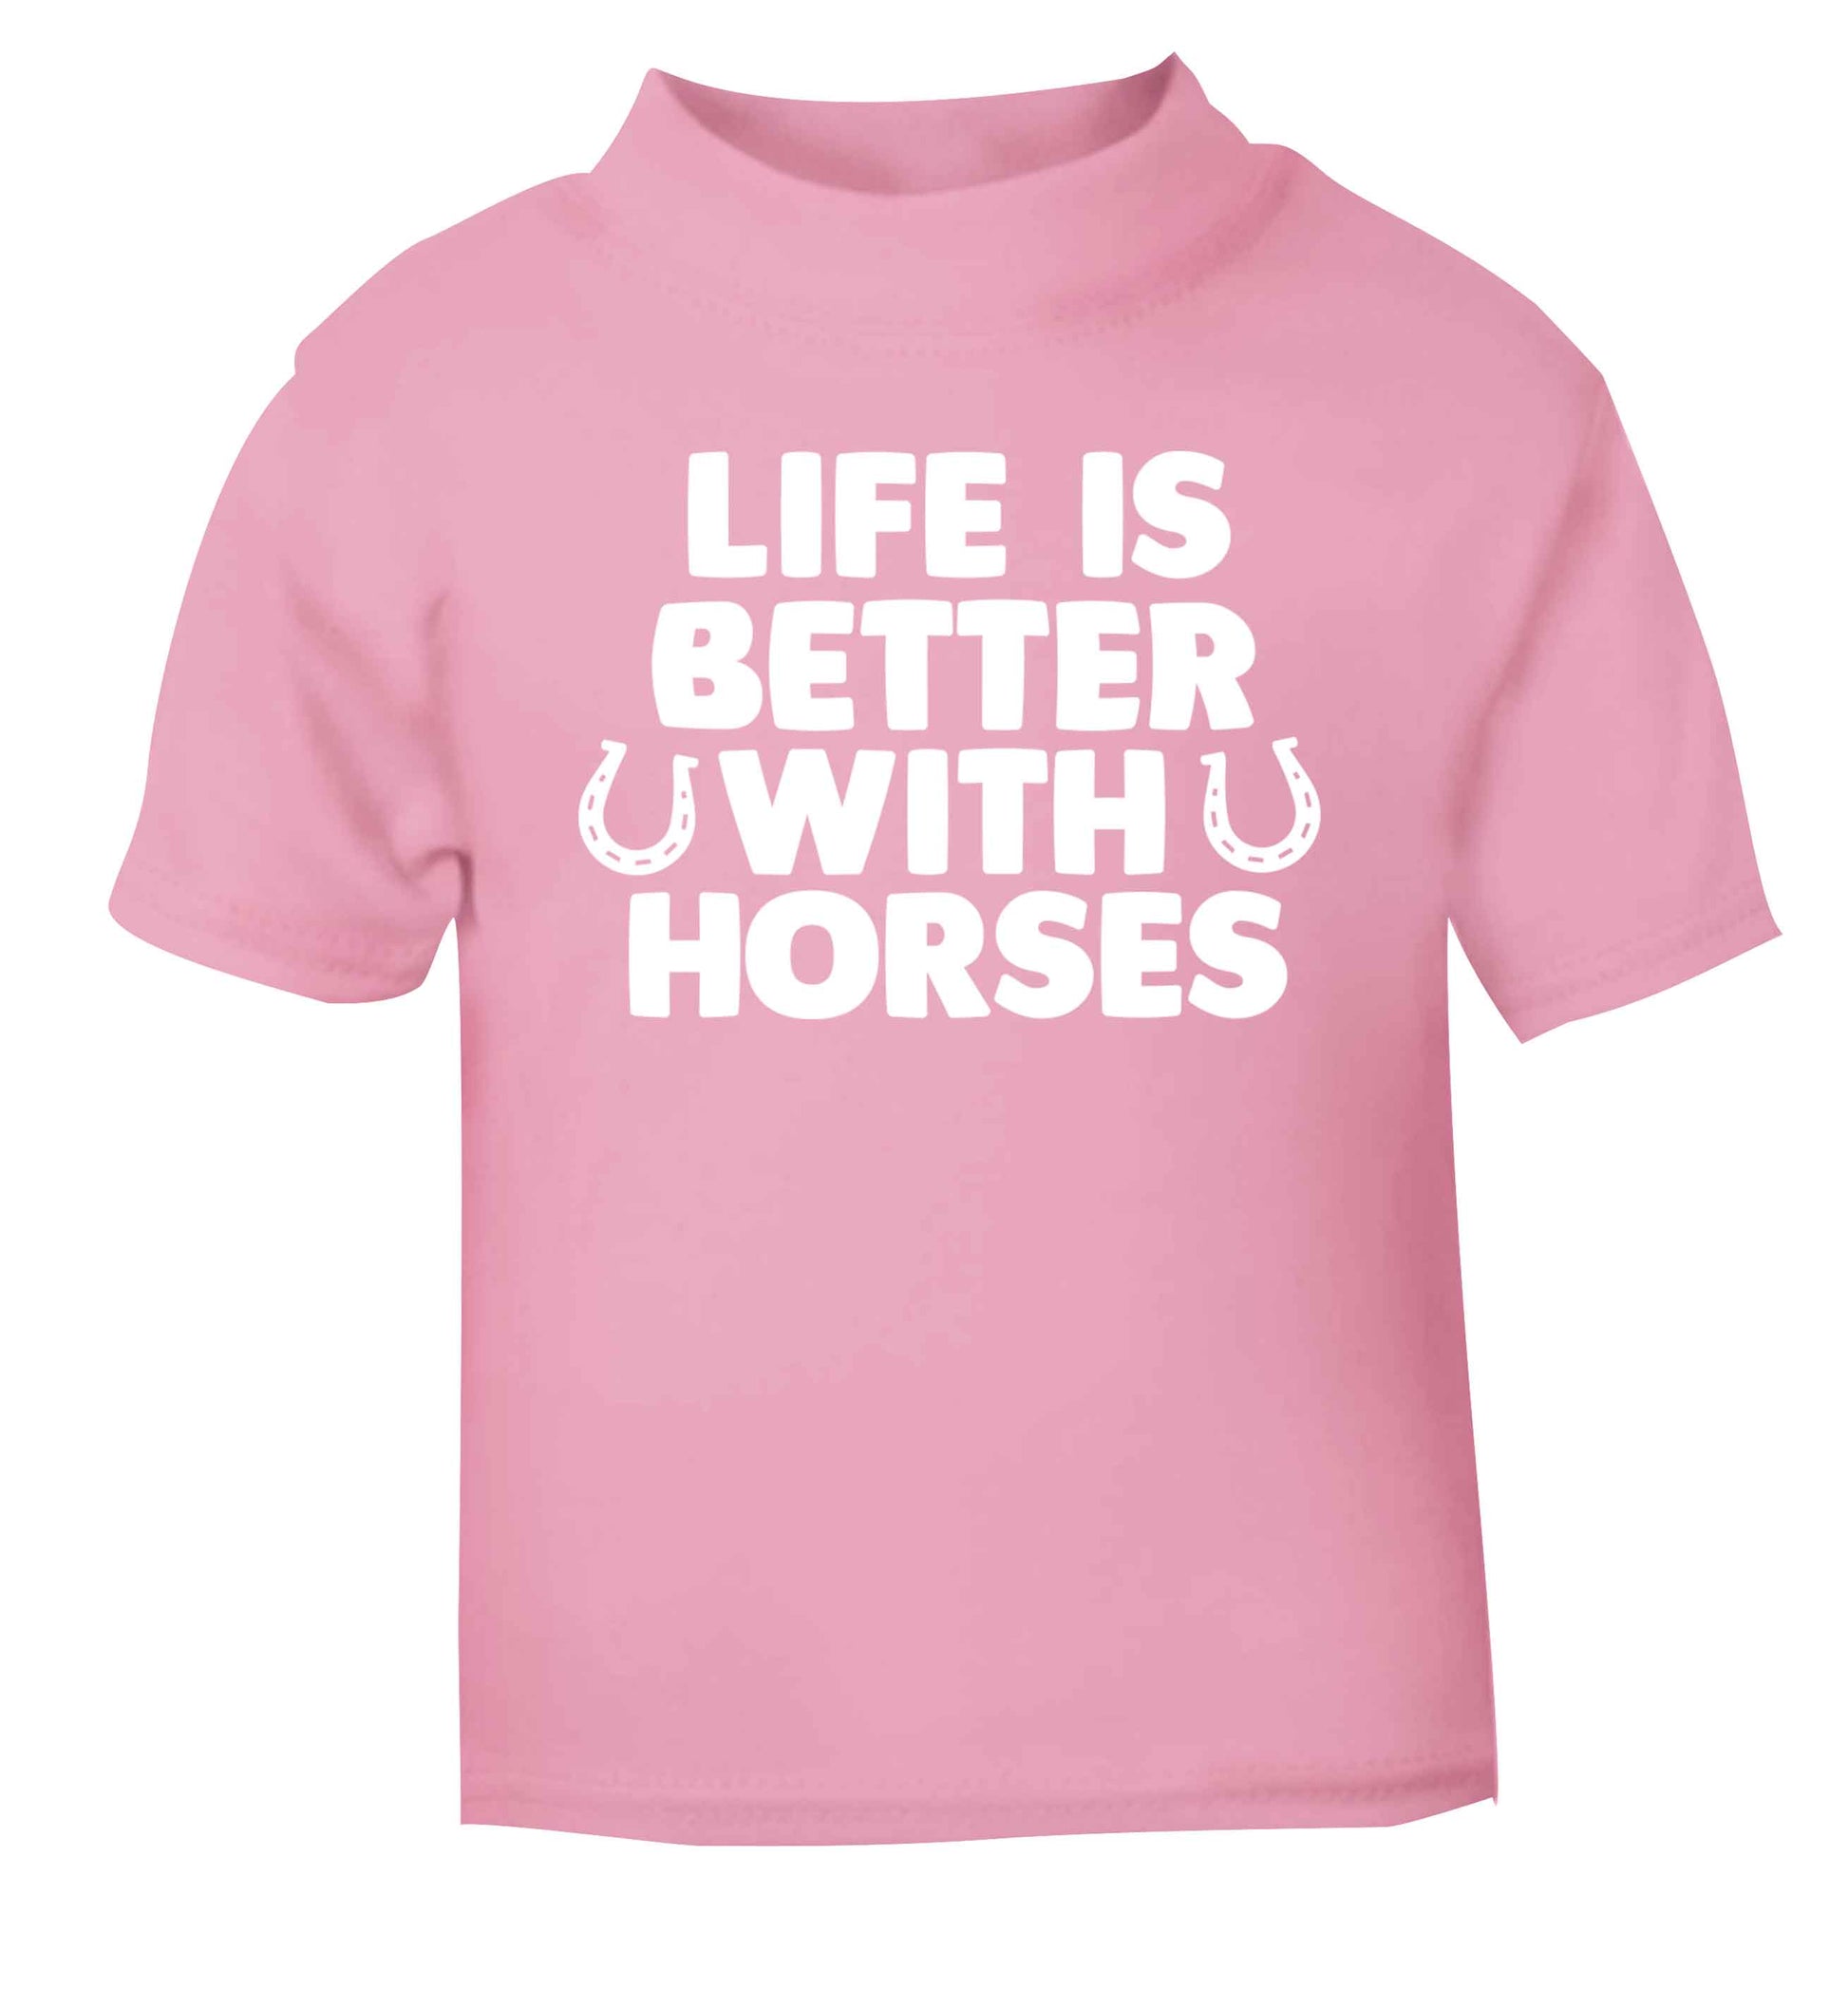 Life is better with horses light pink baby toddler Tshirt 2 Years